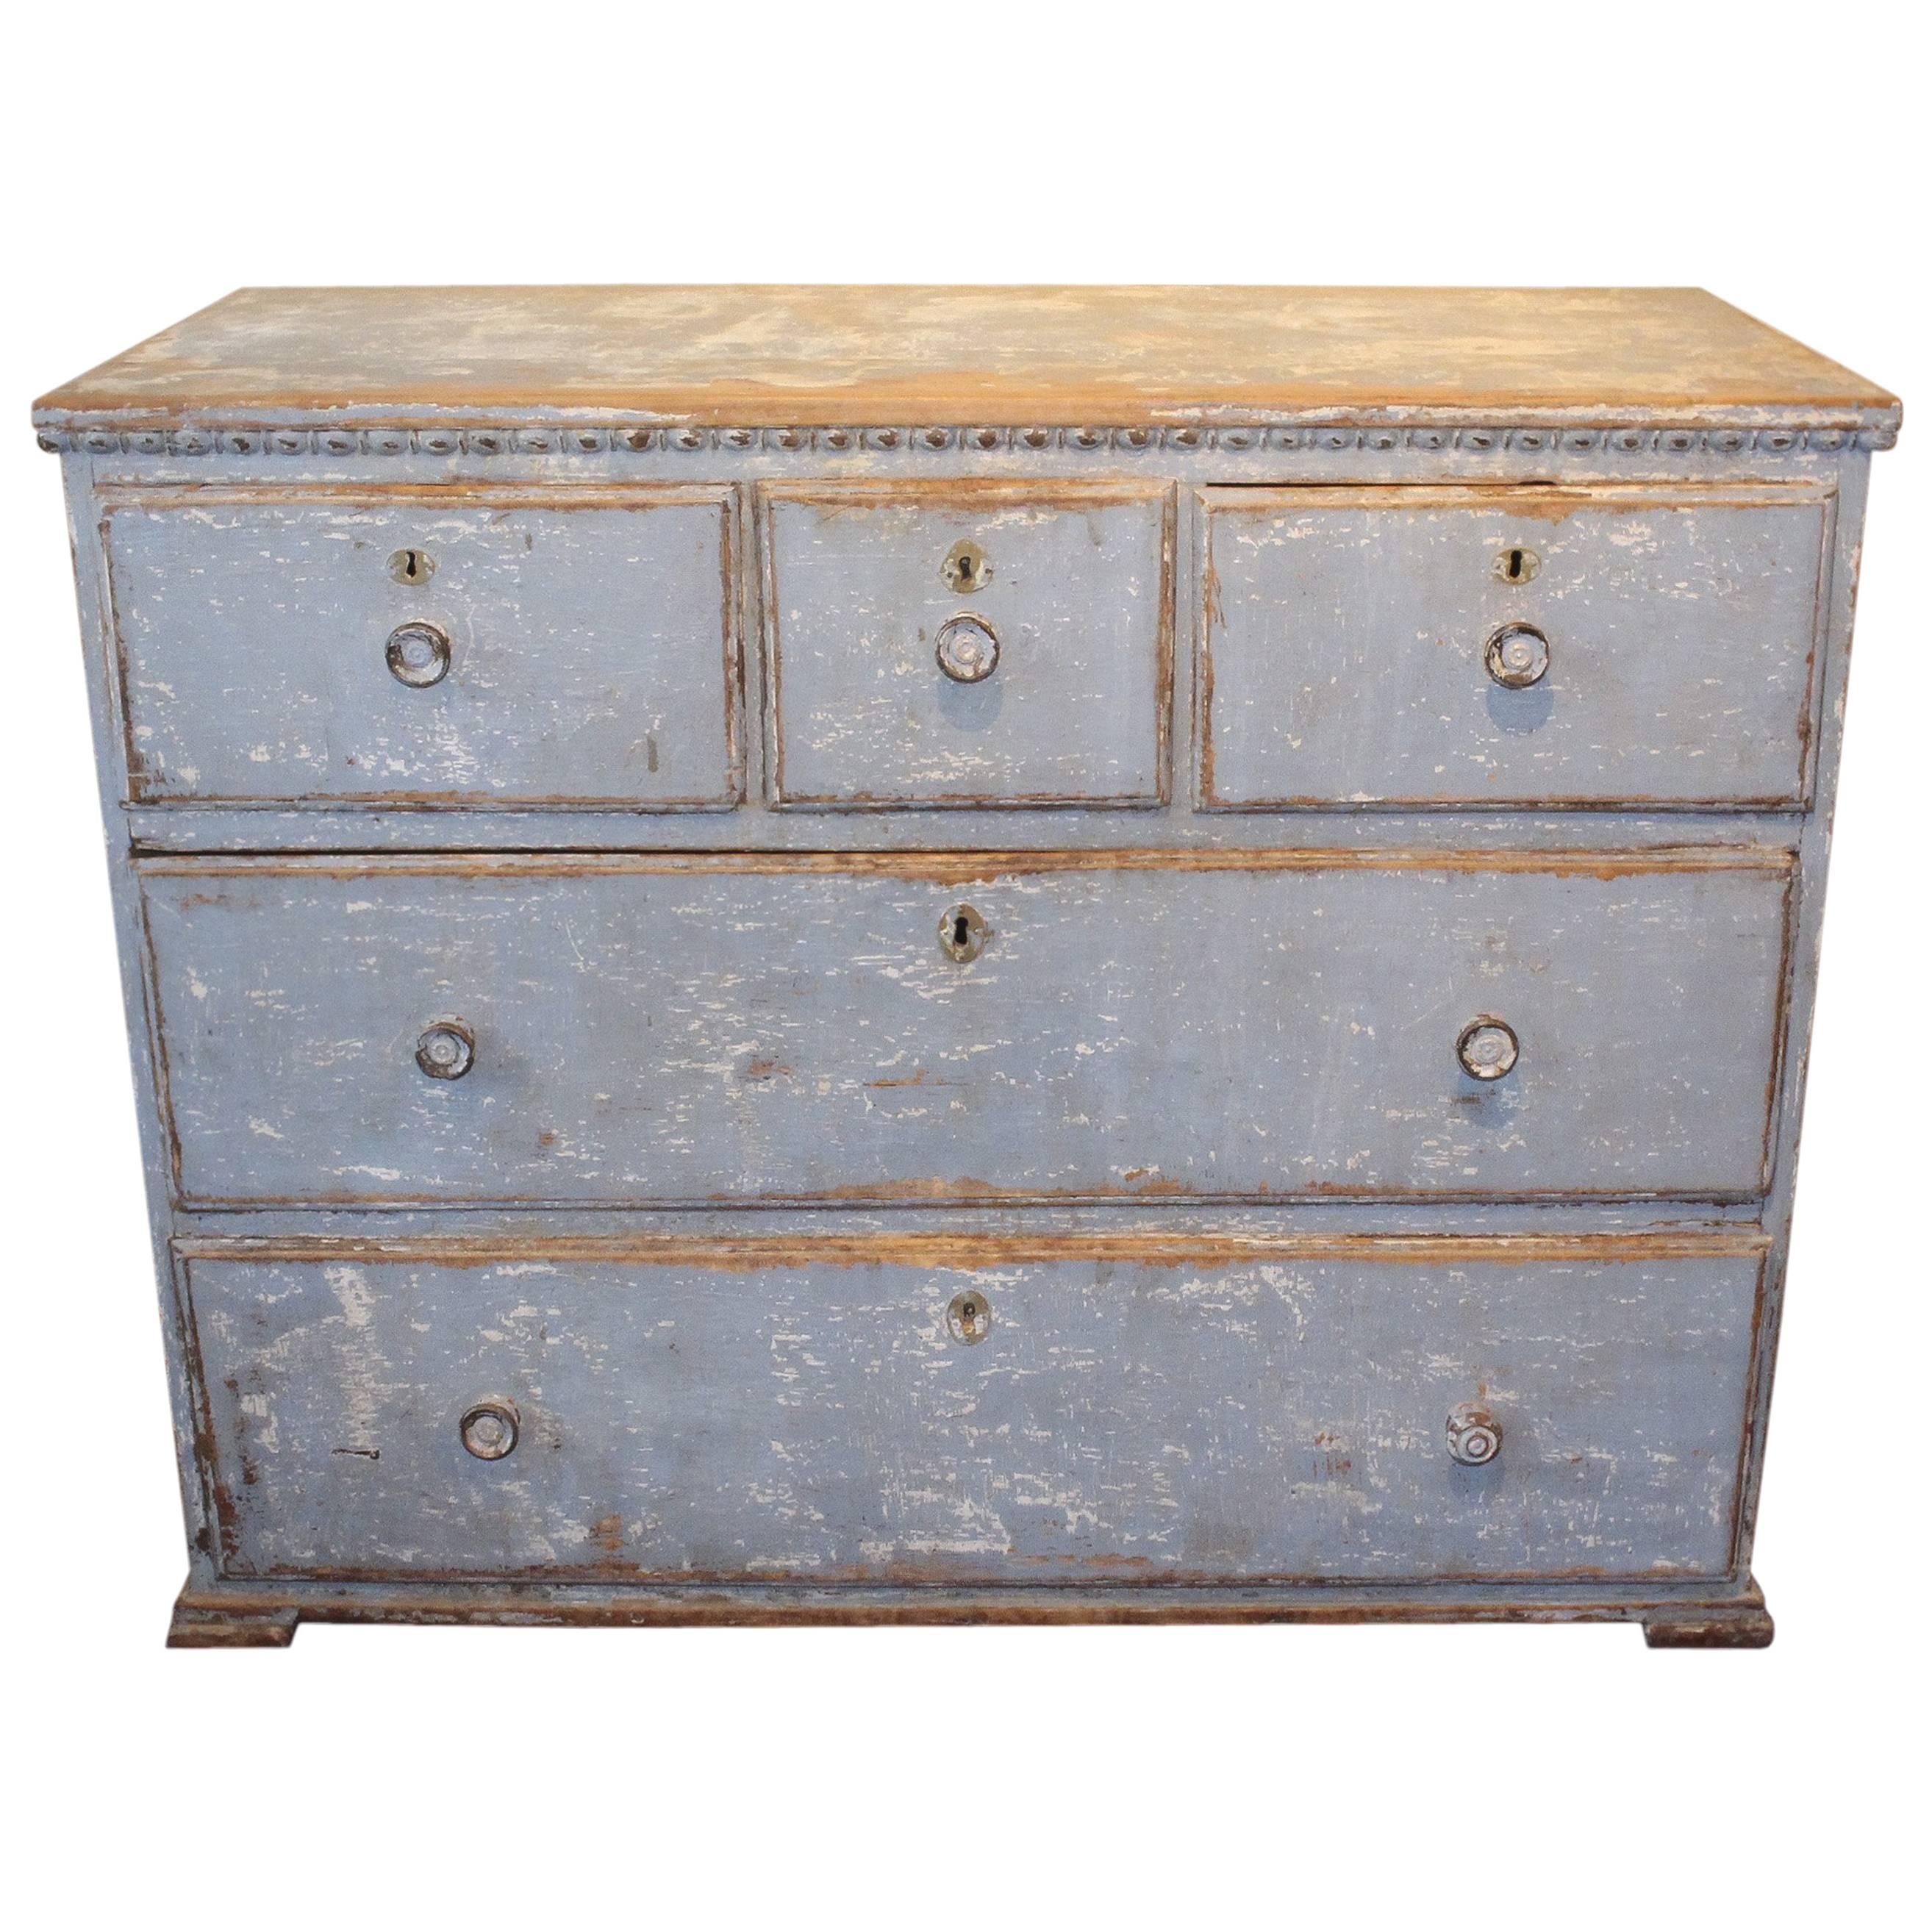 19th Century Portuguese Painted Five-Drawer Chest